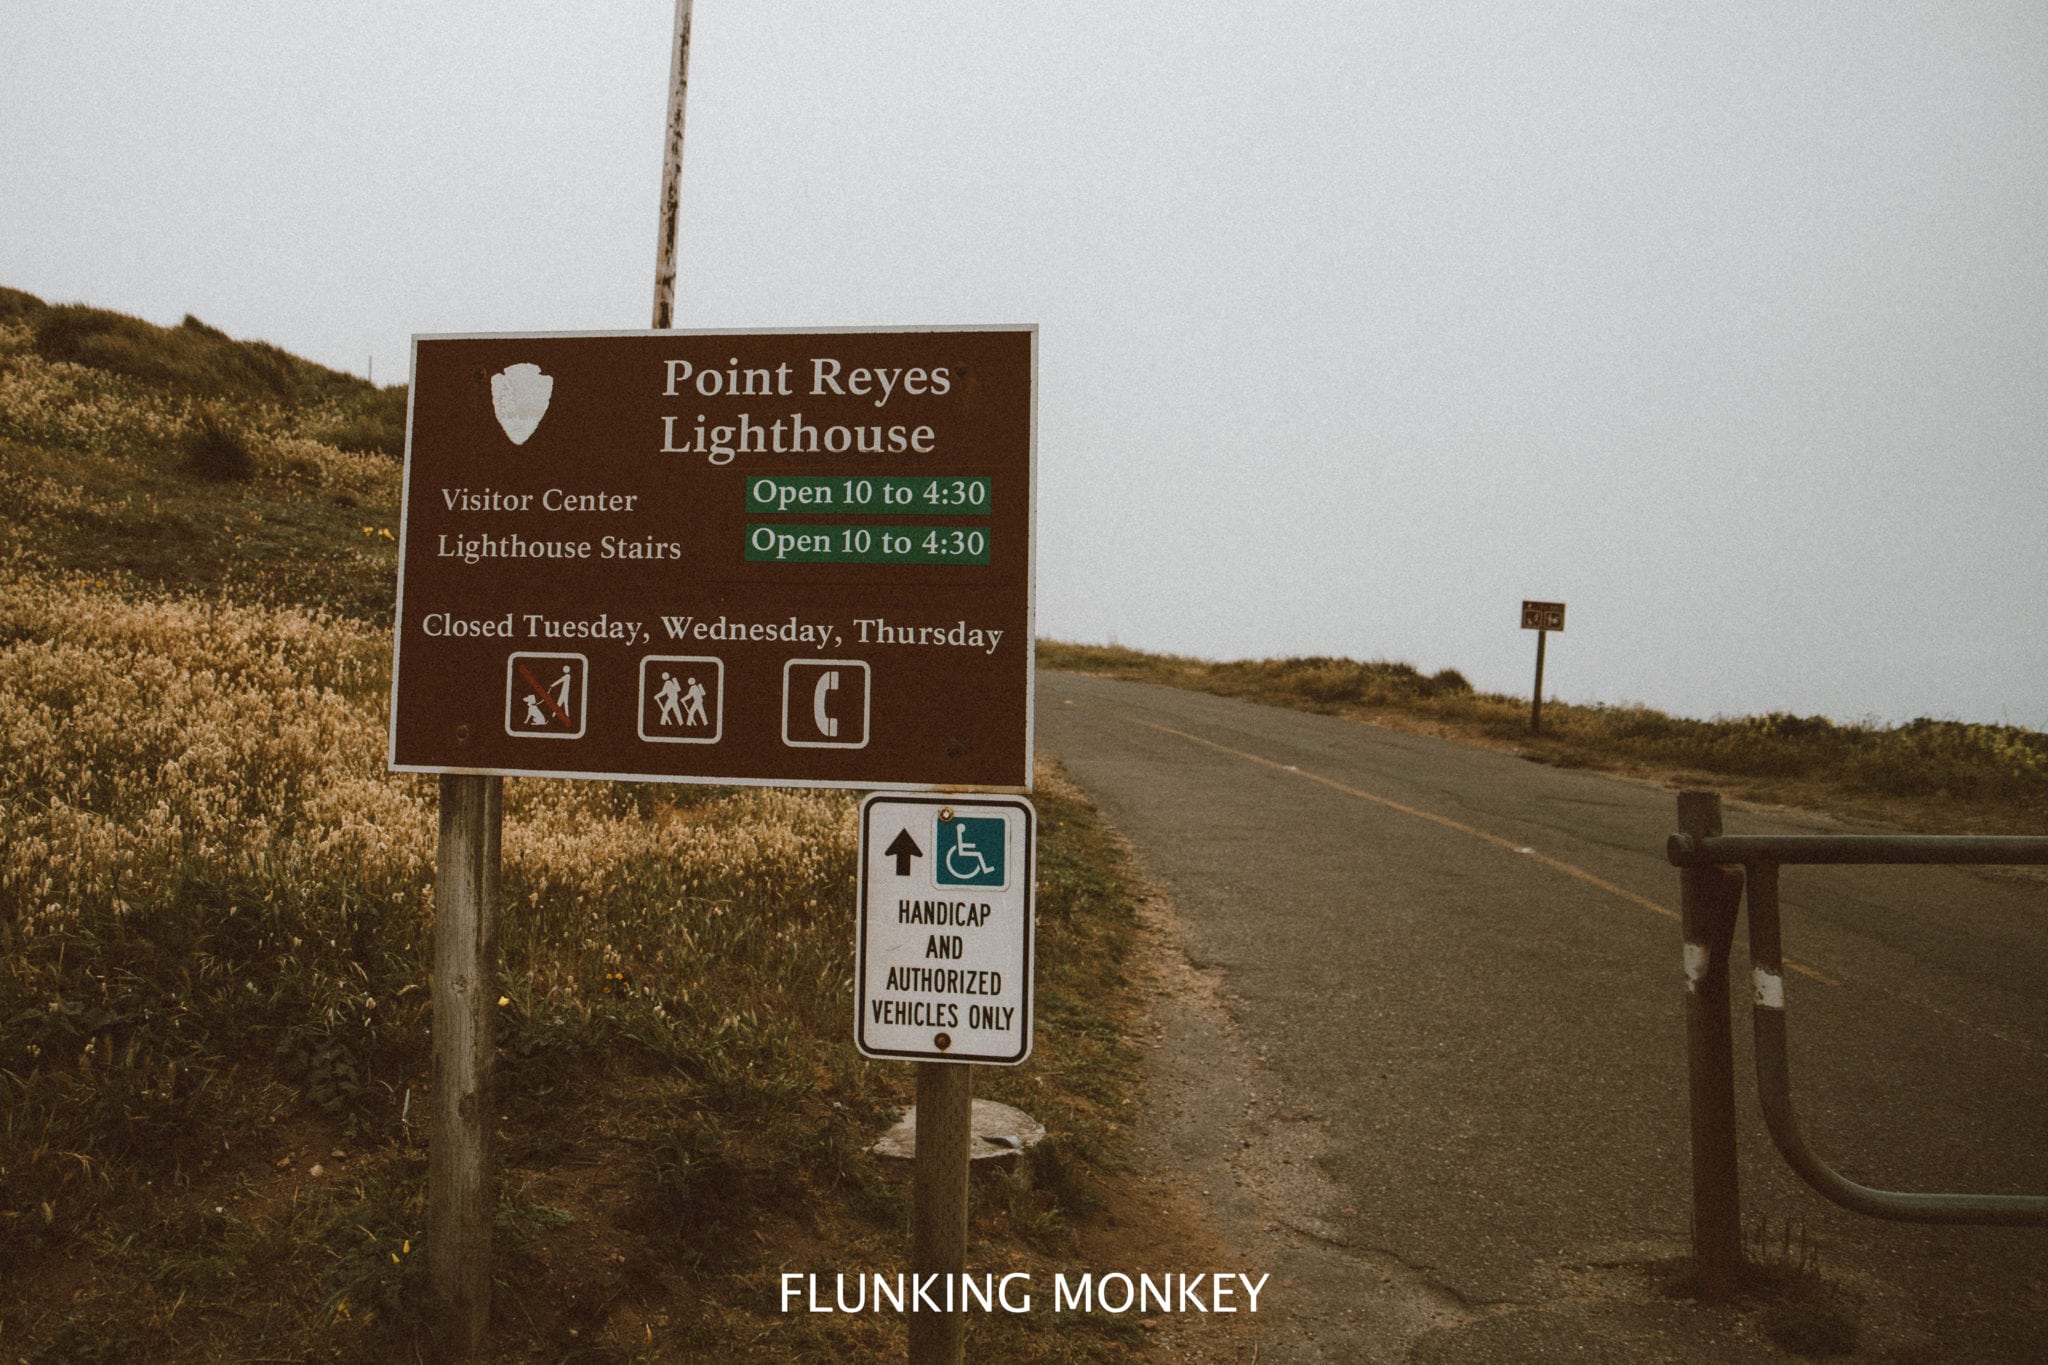 12 Ways To Have The Ultimate Northern California Road Trip -  Things To Do: Point Reyes National Seashore 